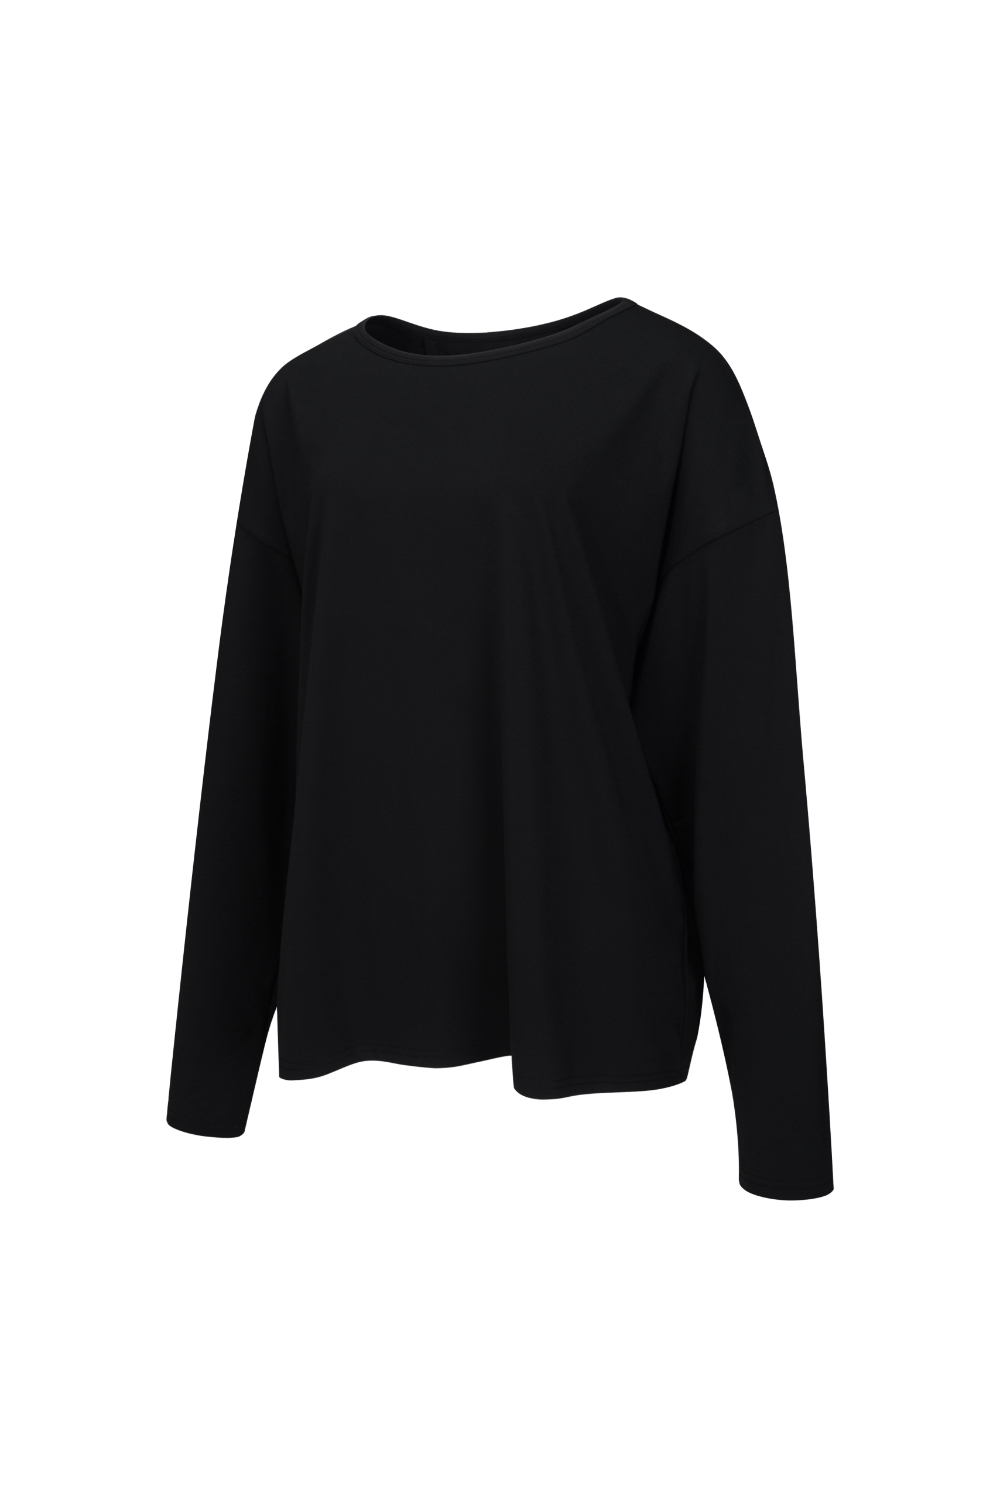 long sleeved tee charcoal color image-S2L2